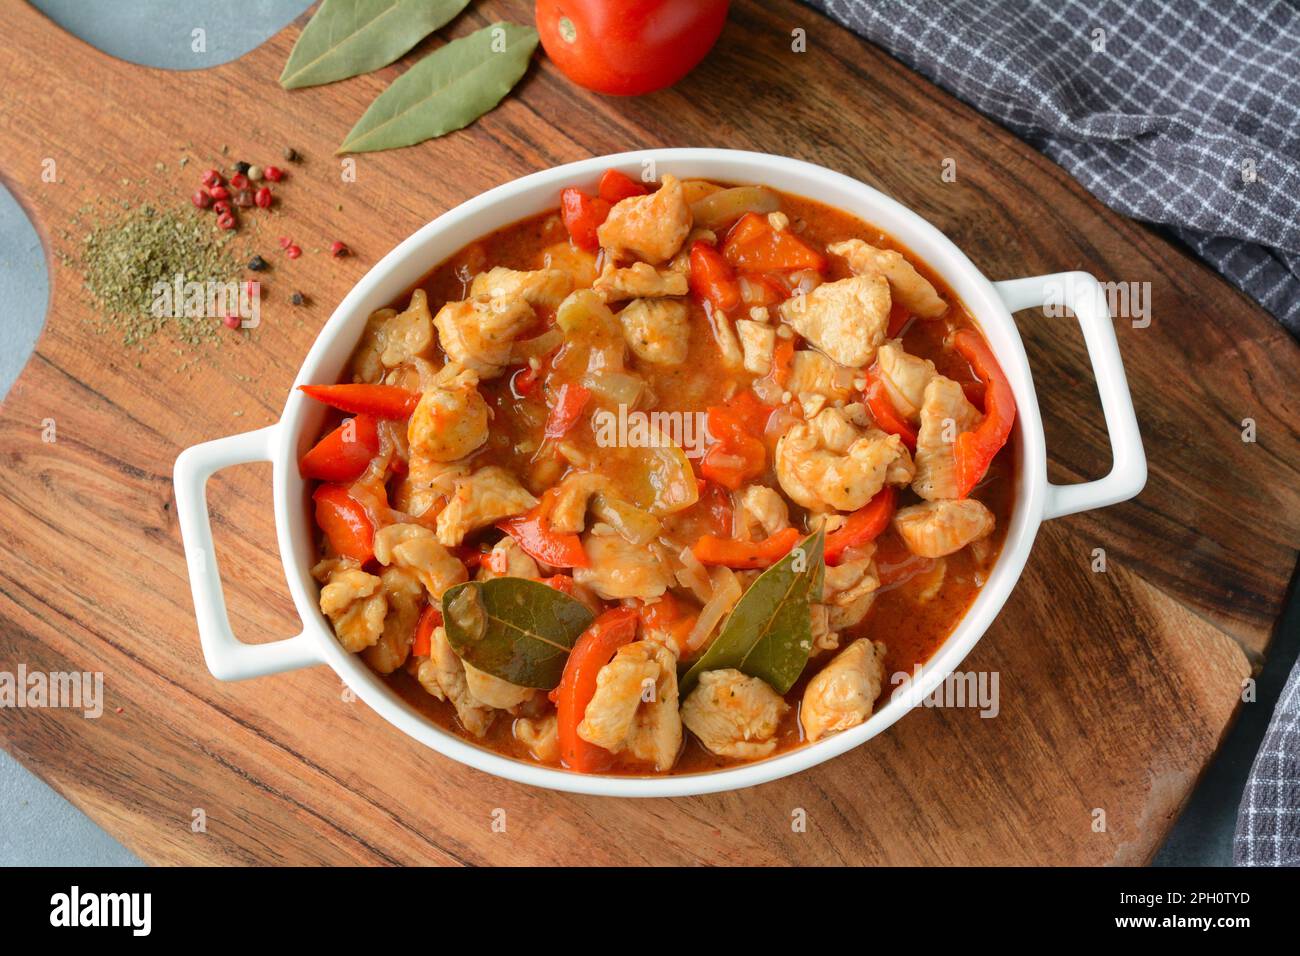 Hungarian turkey stew in tomato sauce and red pepper Stock Photo